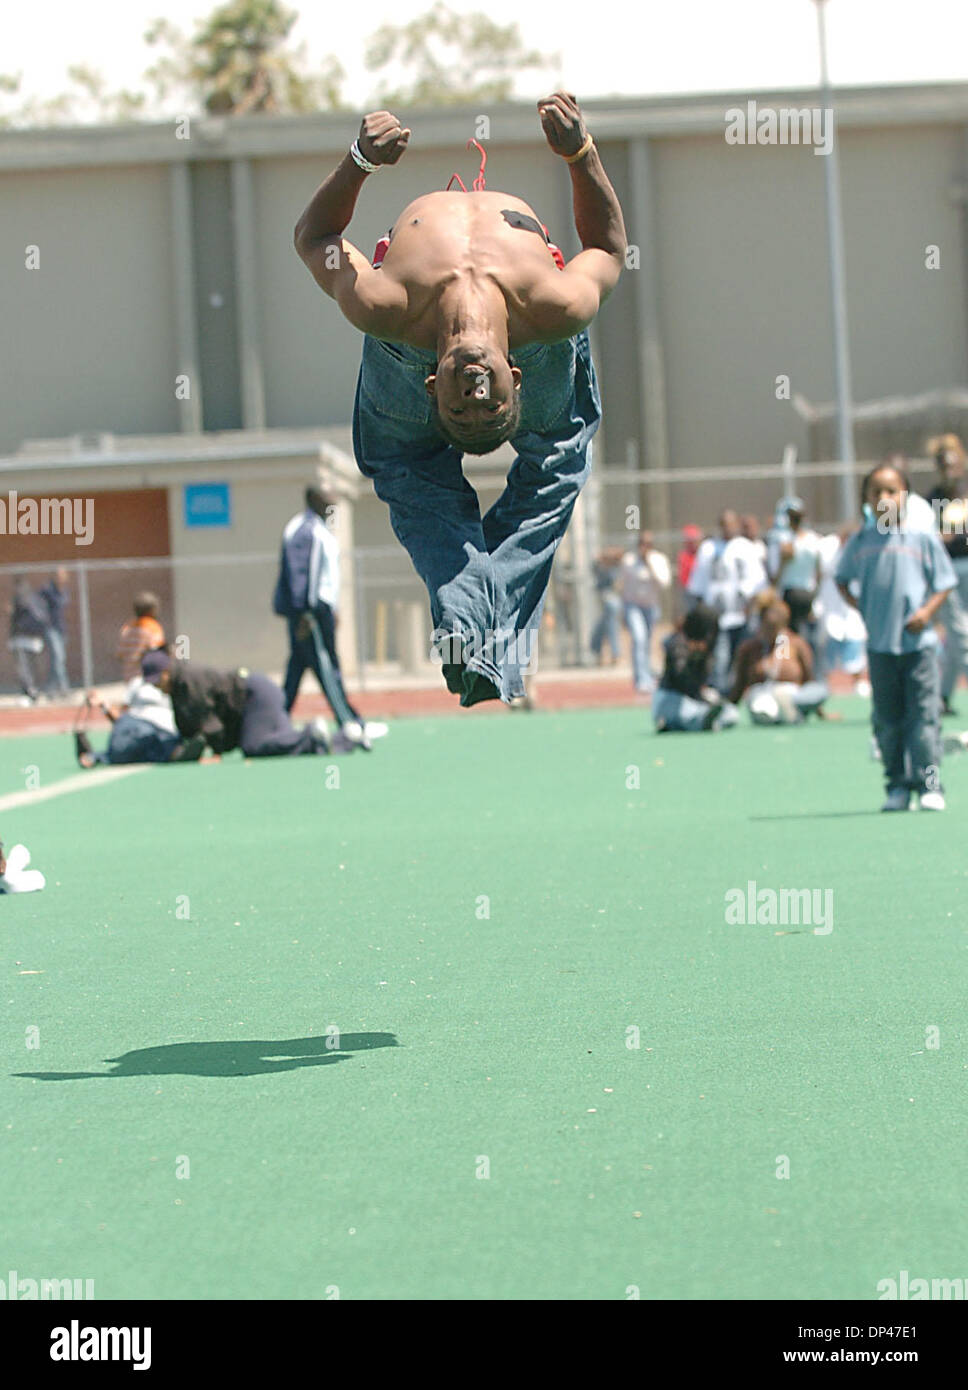 Jul 29, 2006; San Pablo, CA, USA; JESUS EL-LAZARD, 19, does a back flip during the BSAA (Black Sports Agents Association) sports and dance clinic at Contra Costa College. The clinic, thrown by Andre Farr, a former Kennedy High School and UCLA football player, featured motivational speakers and professional coaches giving instruction in basketball, football and dance among others. T Stock Photo